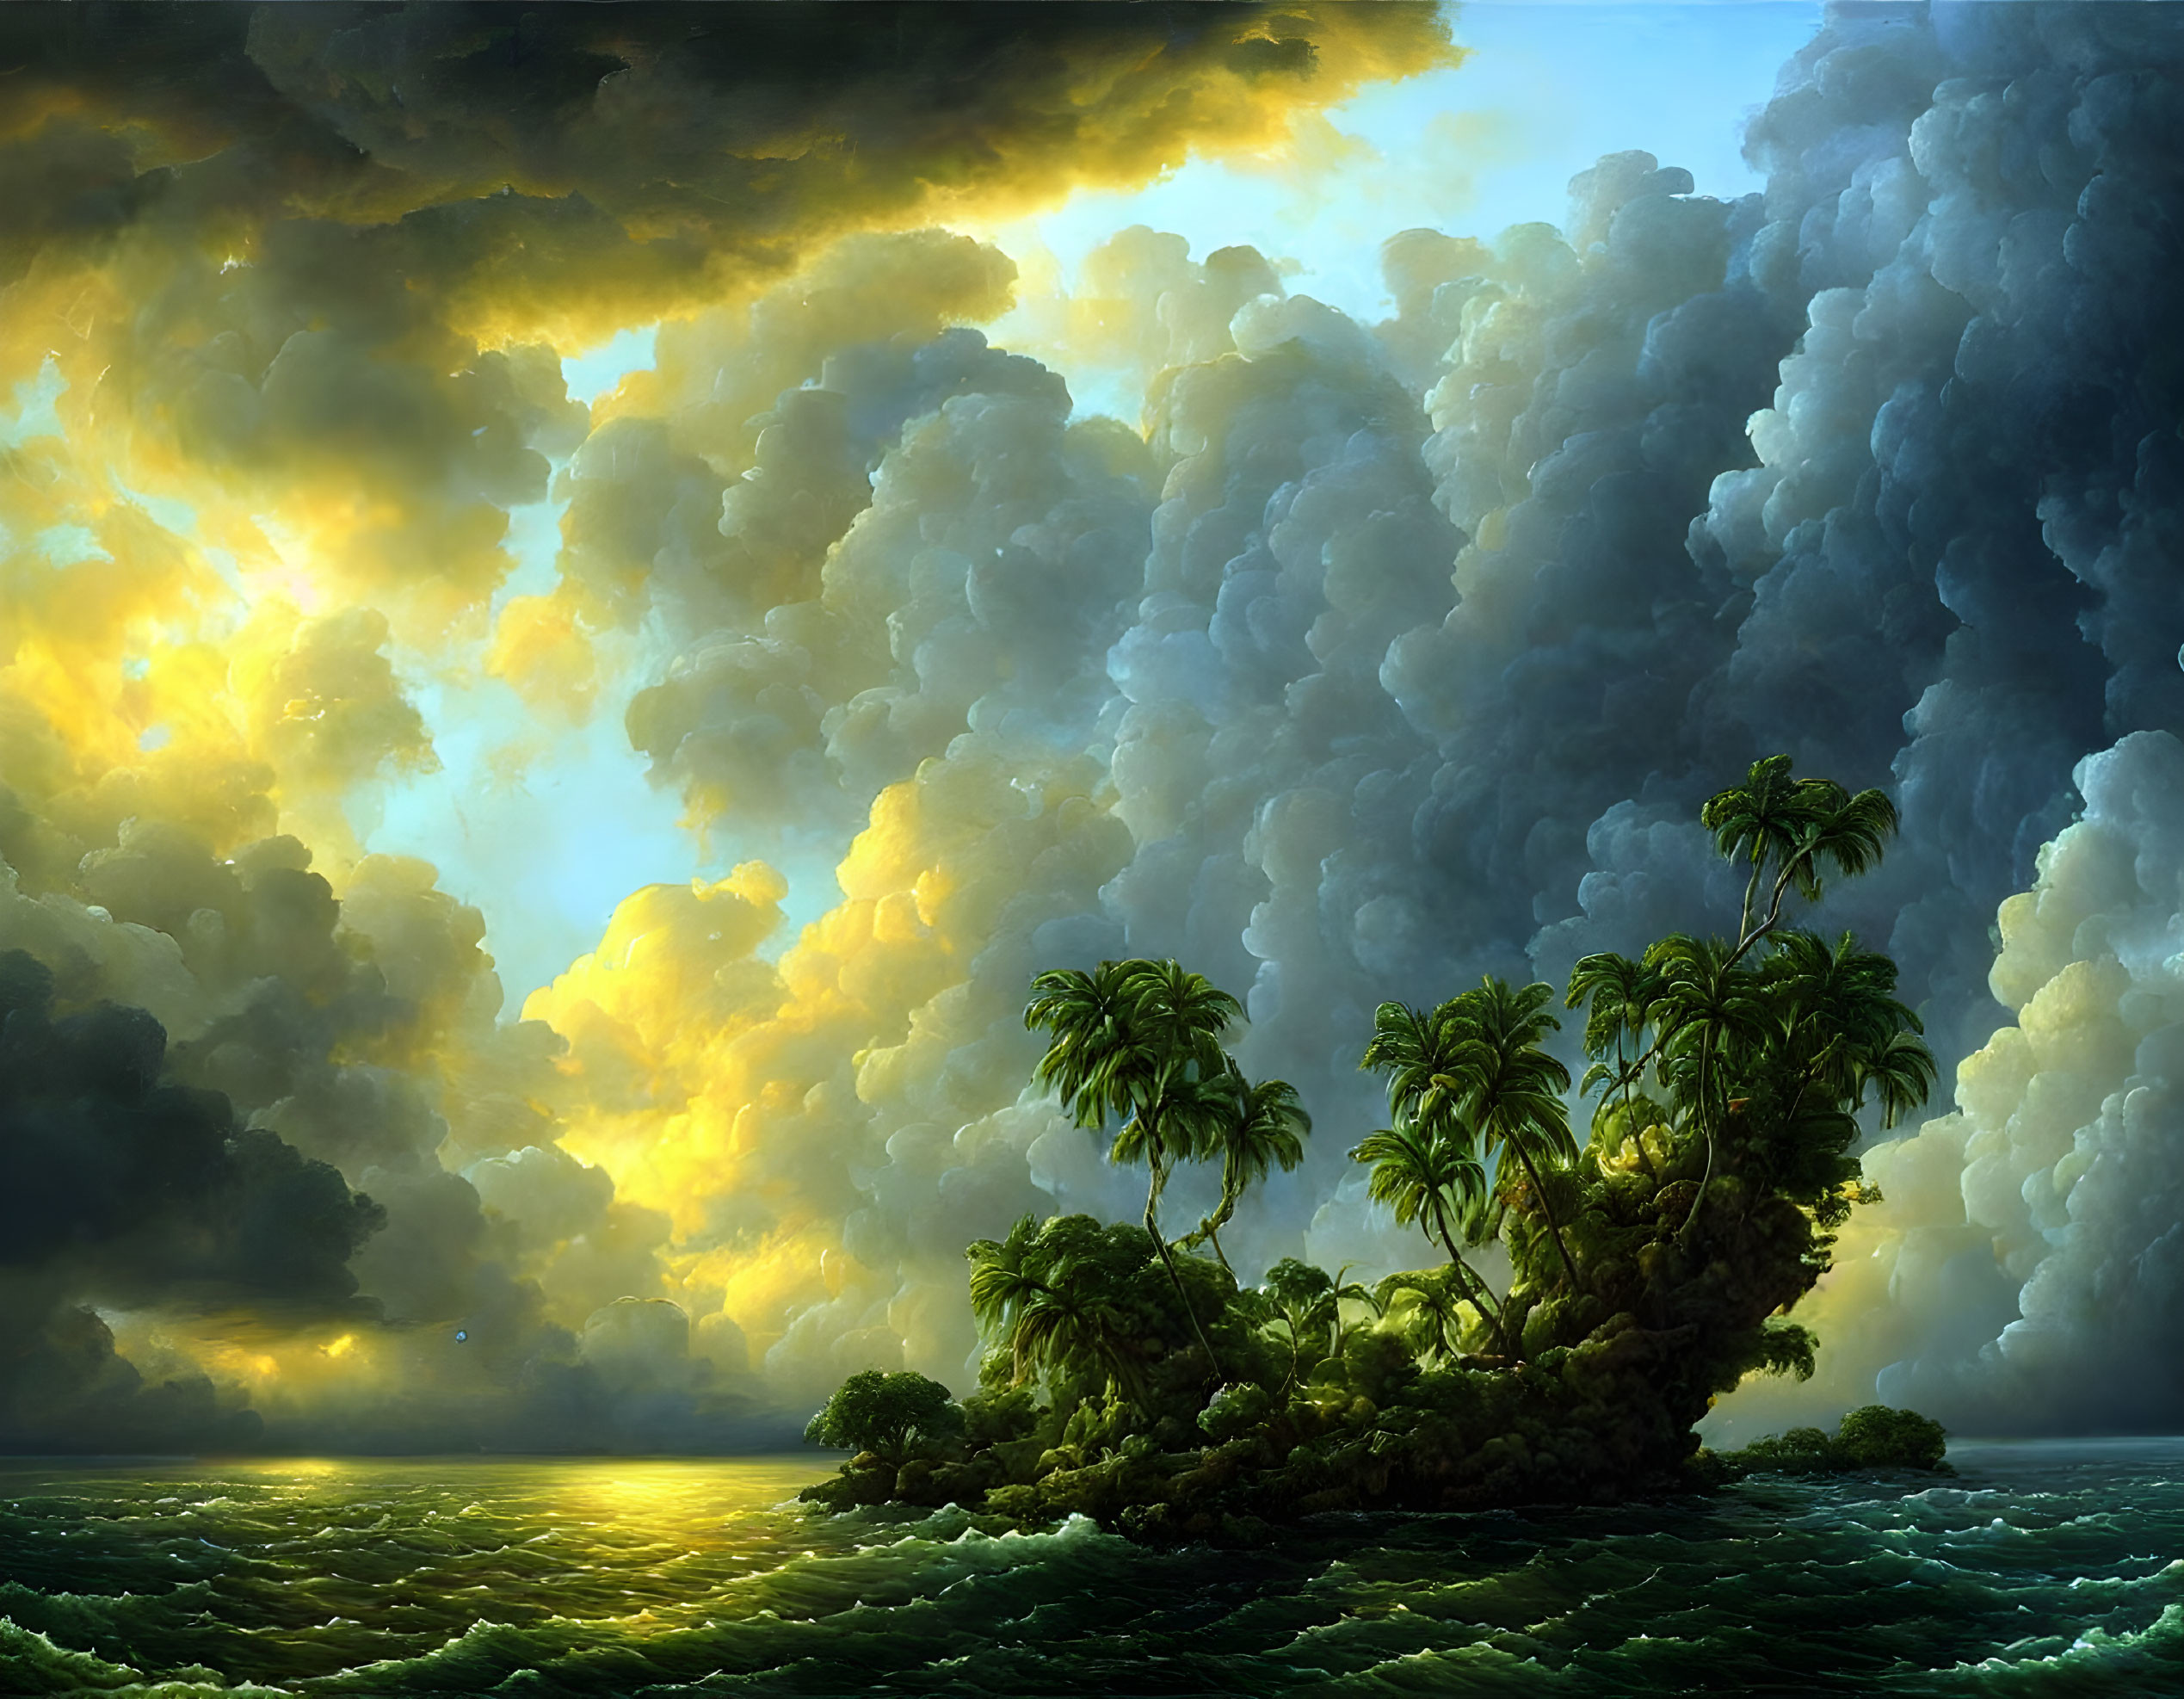 Tropical island in approaching storm